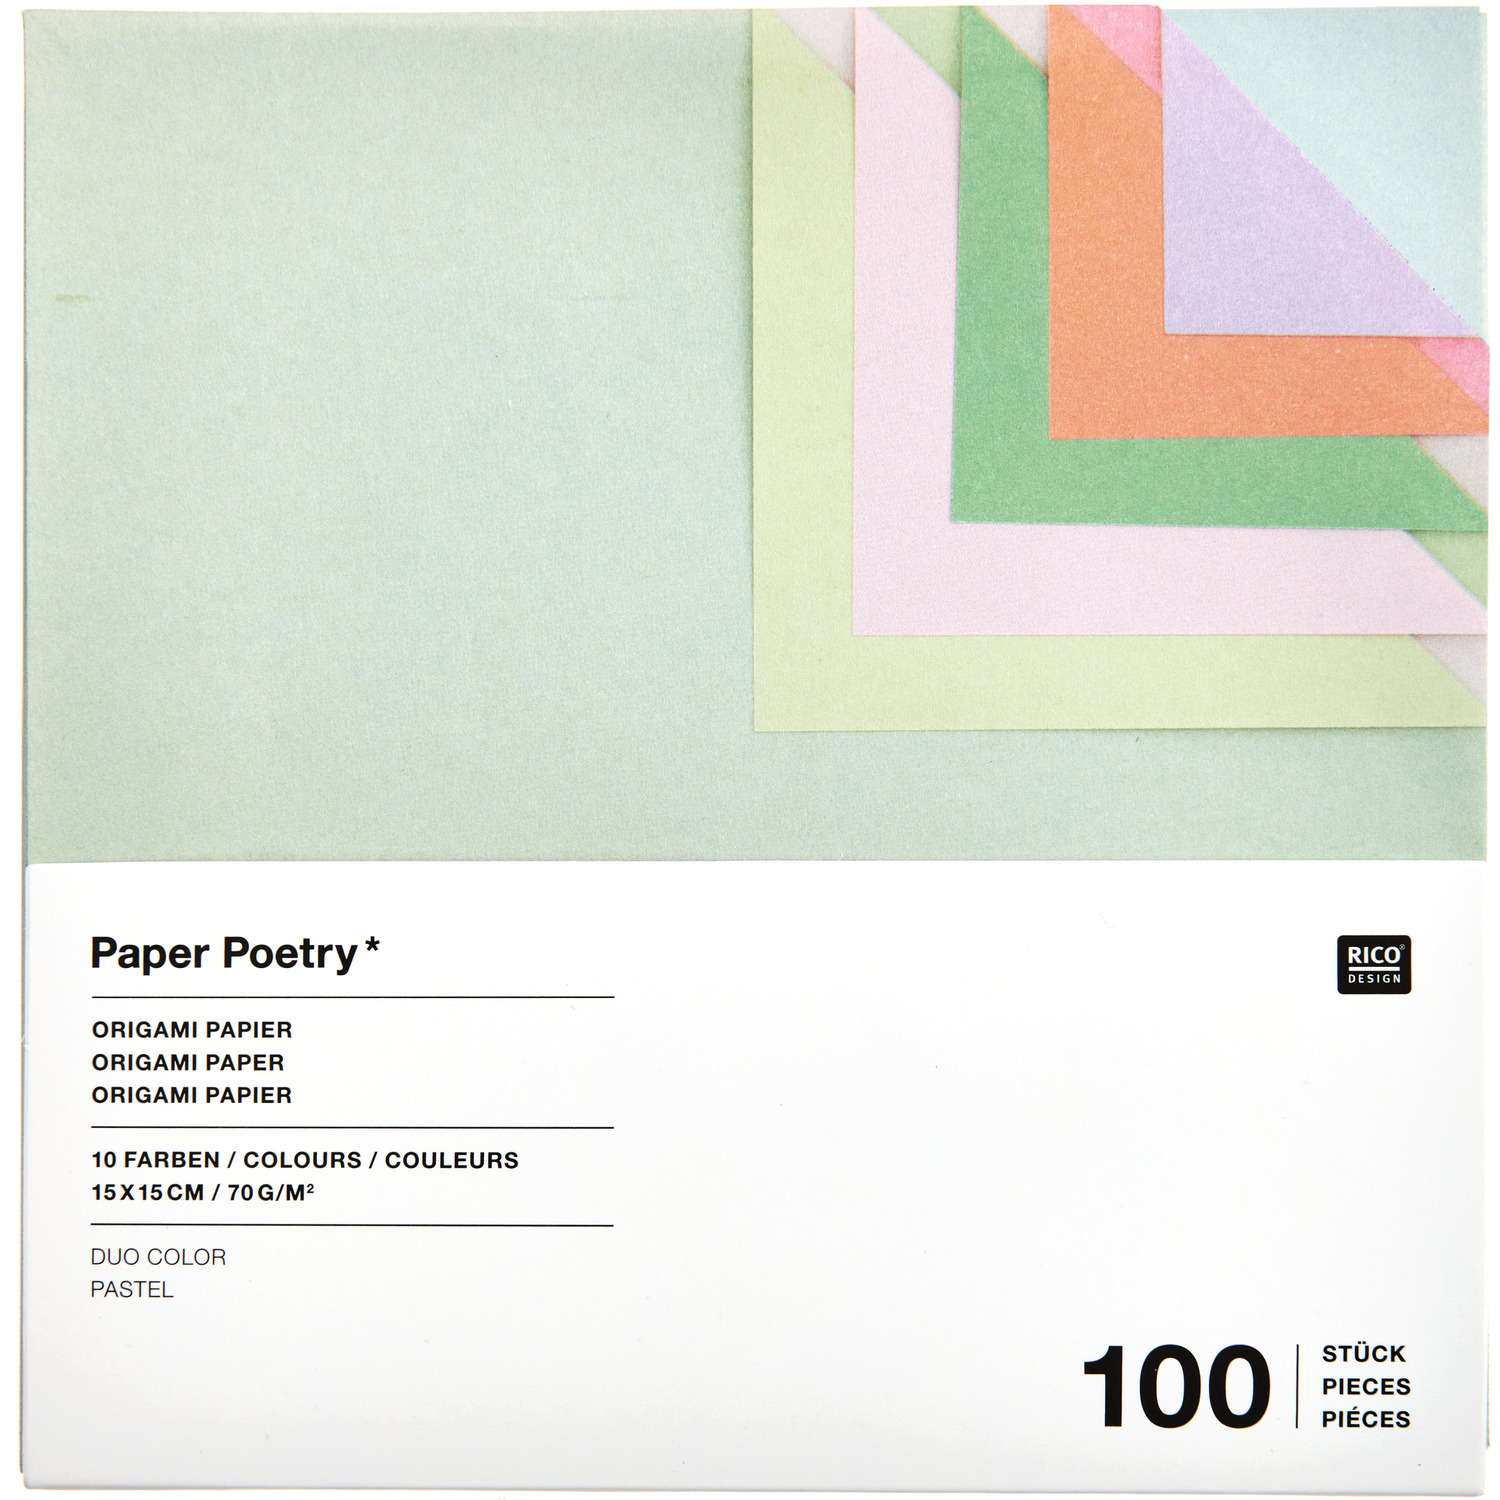 Paper Poetry Origami Duo color Pastell